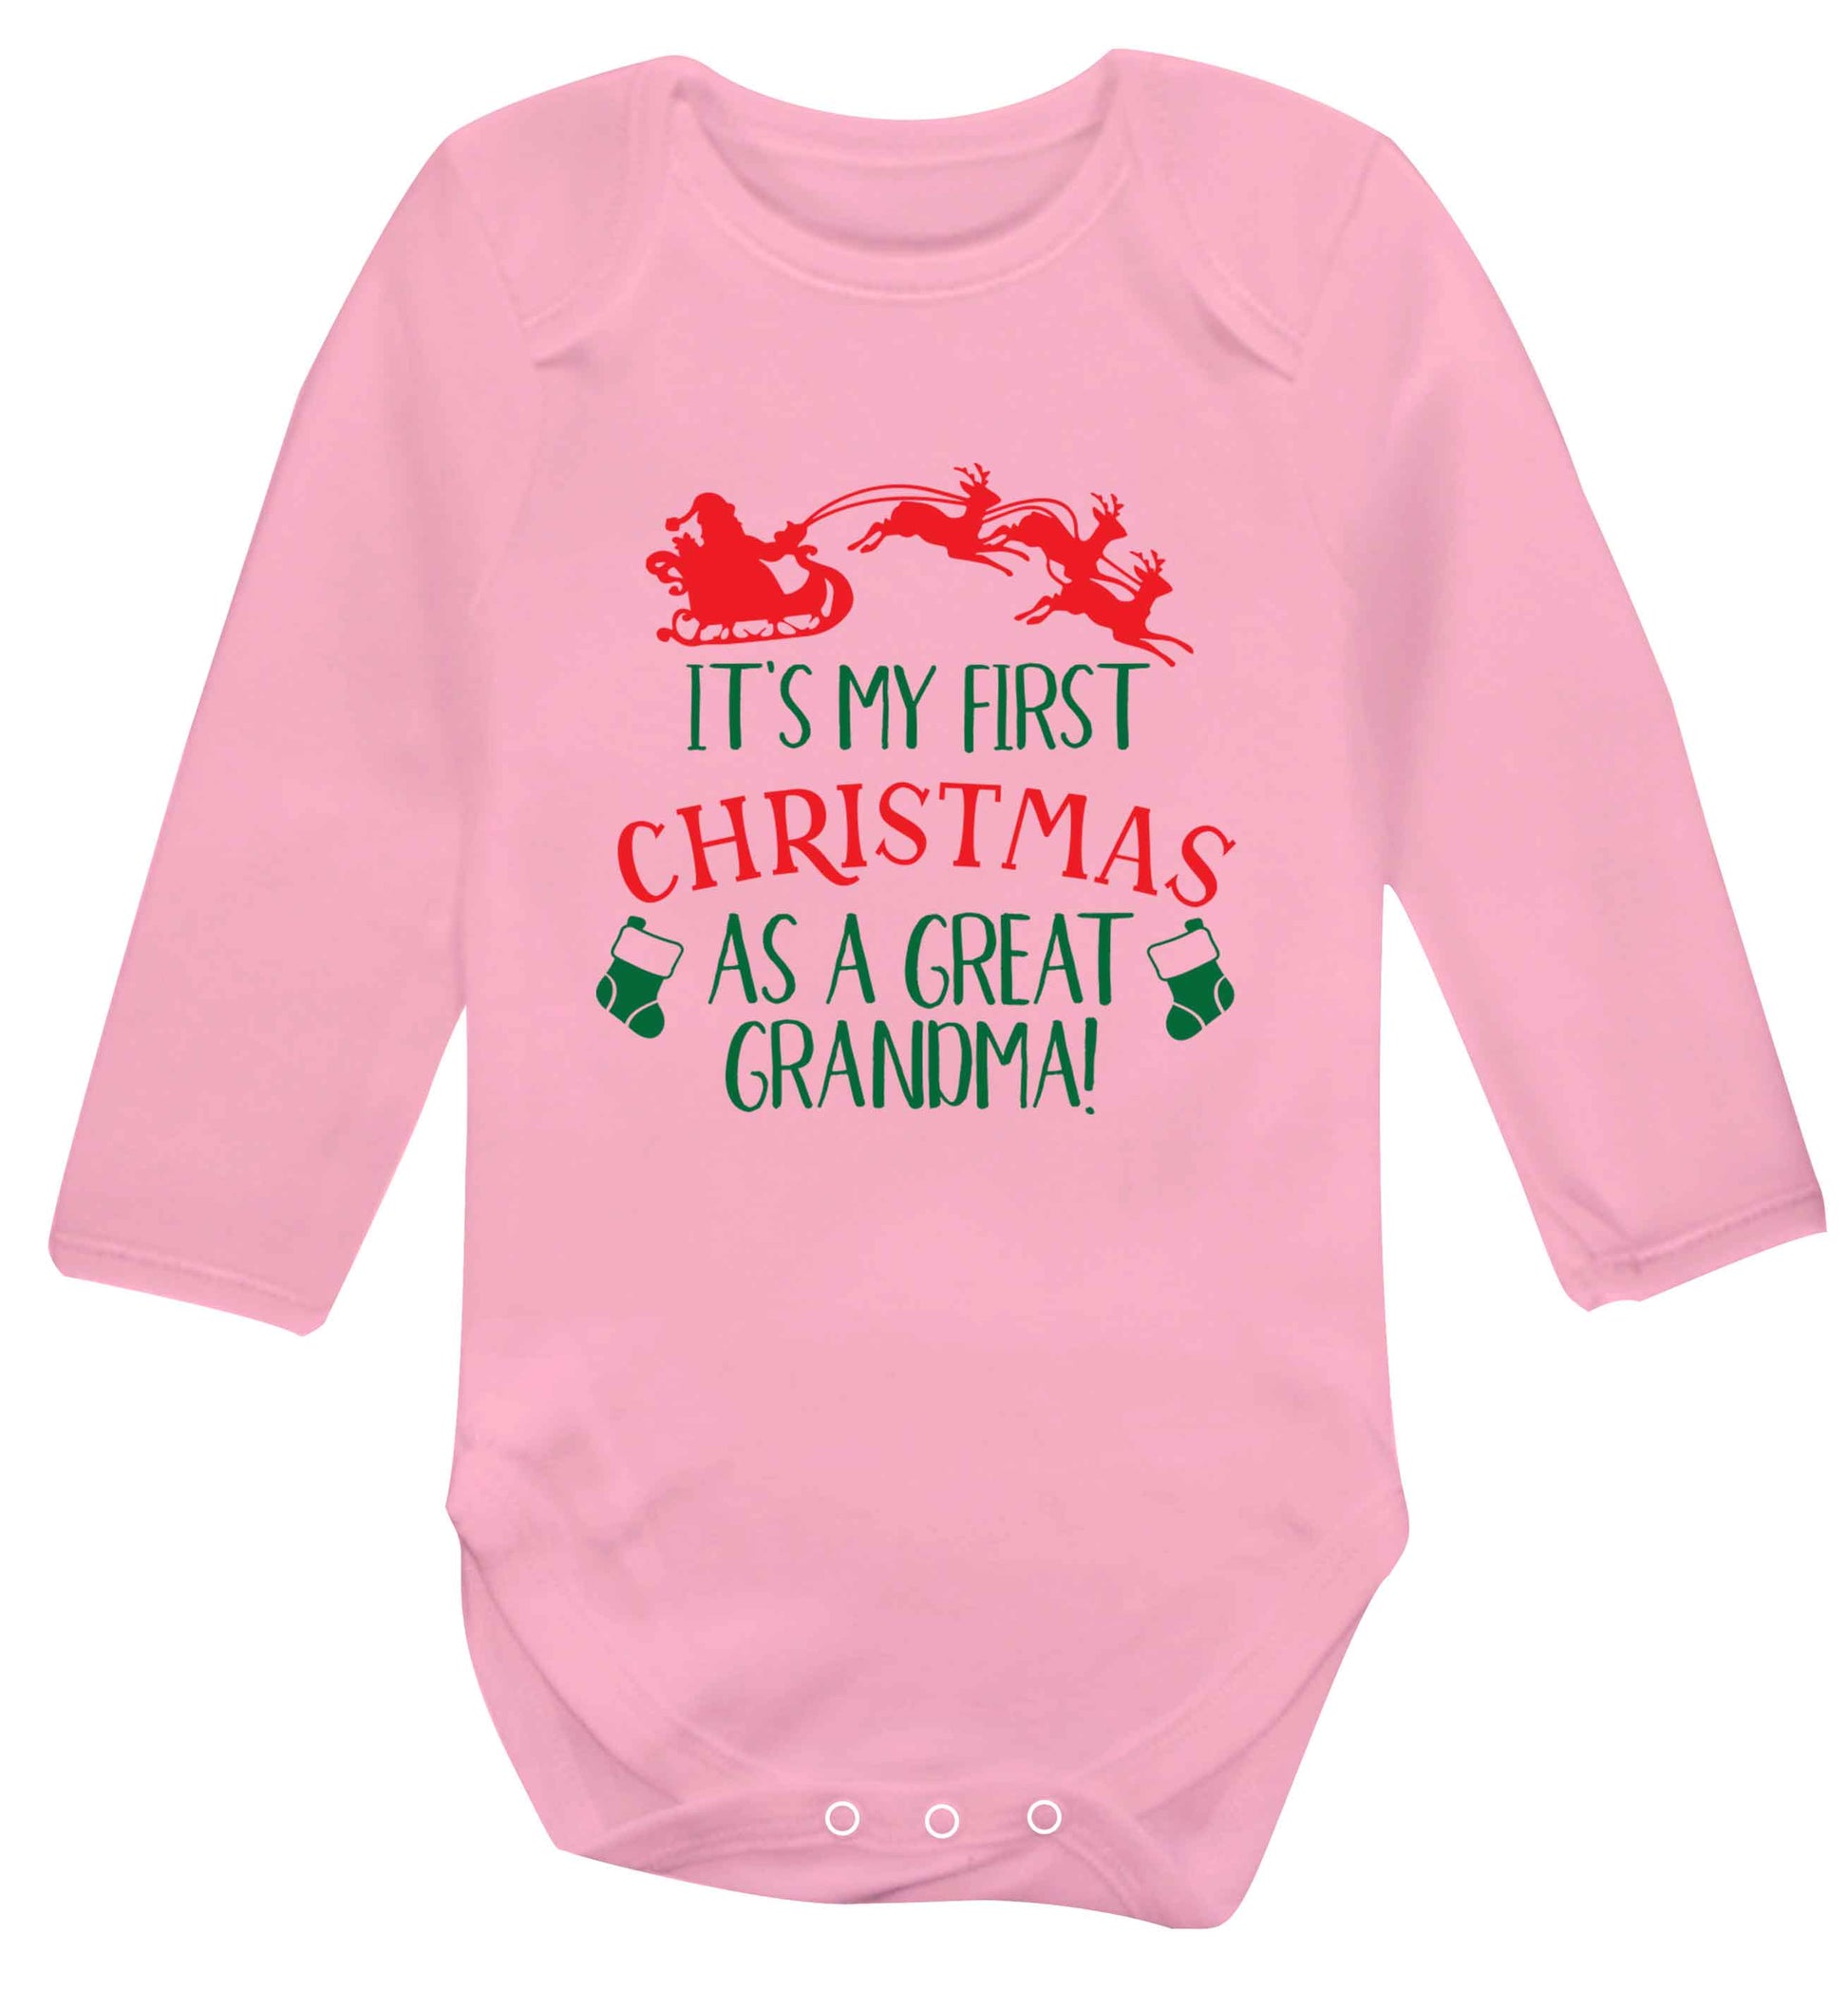 It's my first Christmas as a great grandma! Baby Vest long sleeved pale pink 6-12 months